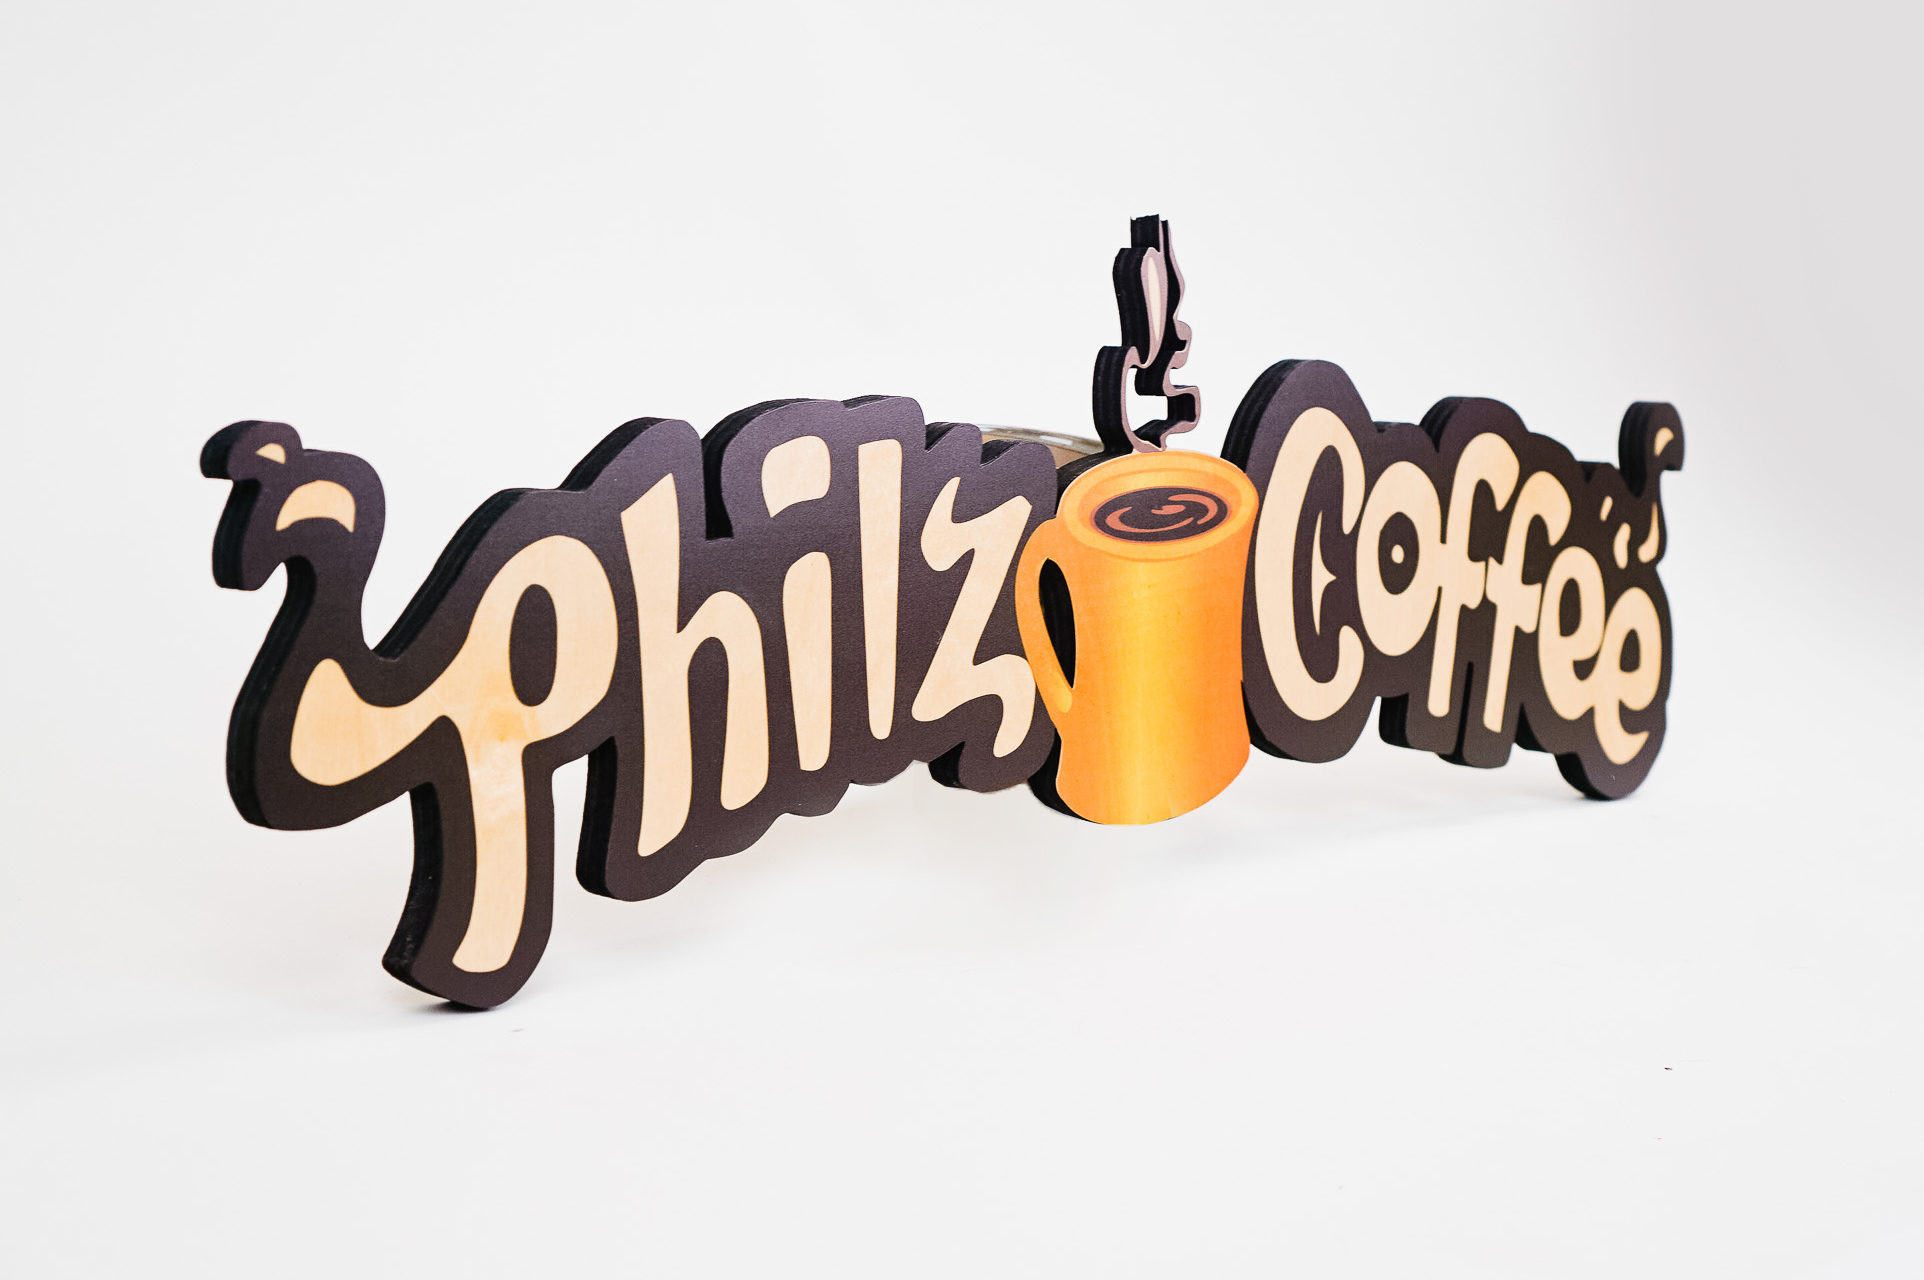 Printed wood, cafe menu sign for Philz Coffee, a coffee company and coffeehouse chain based in San Francisco, California.